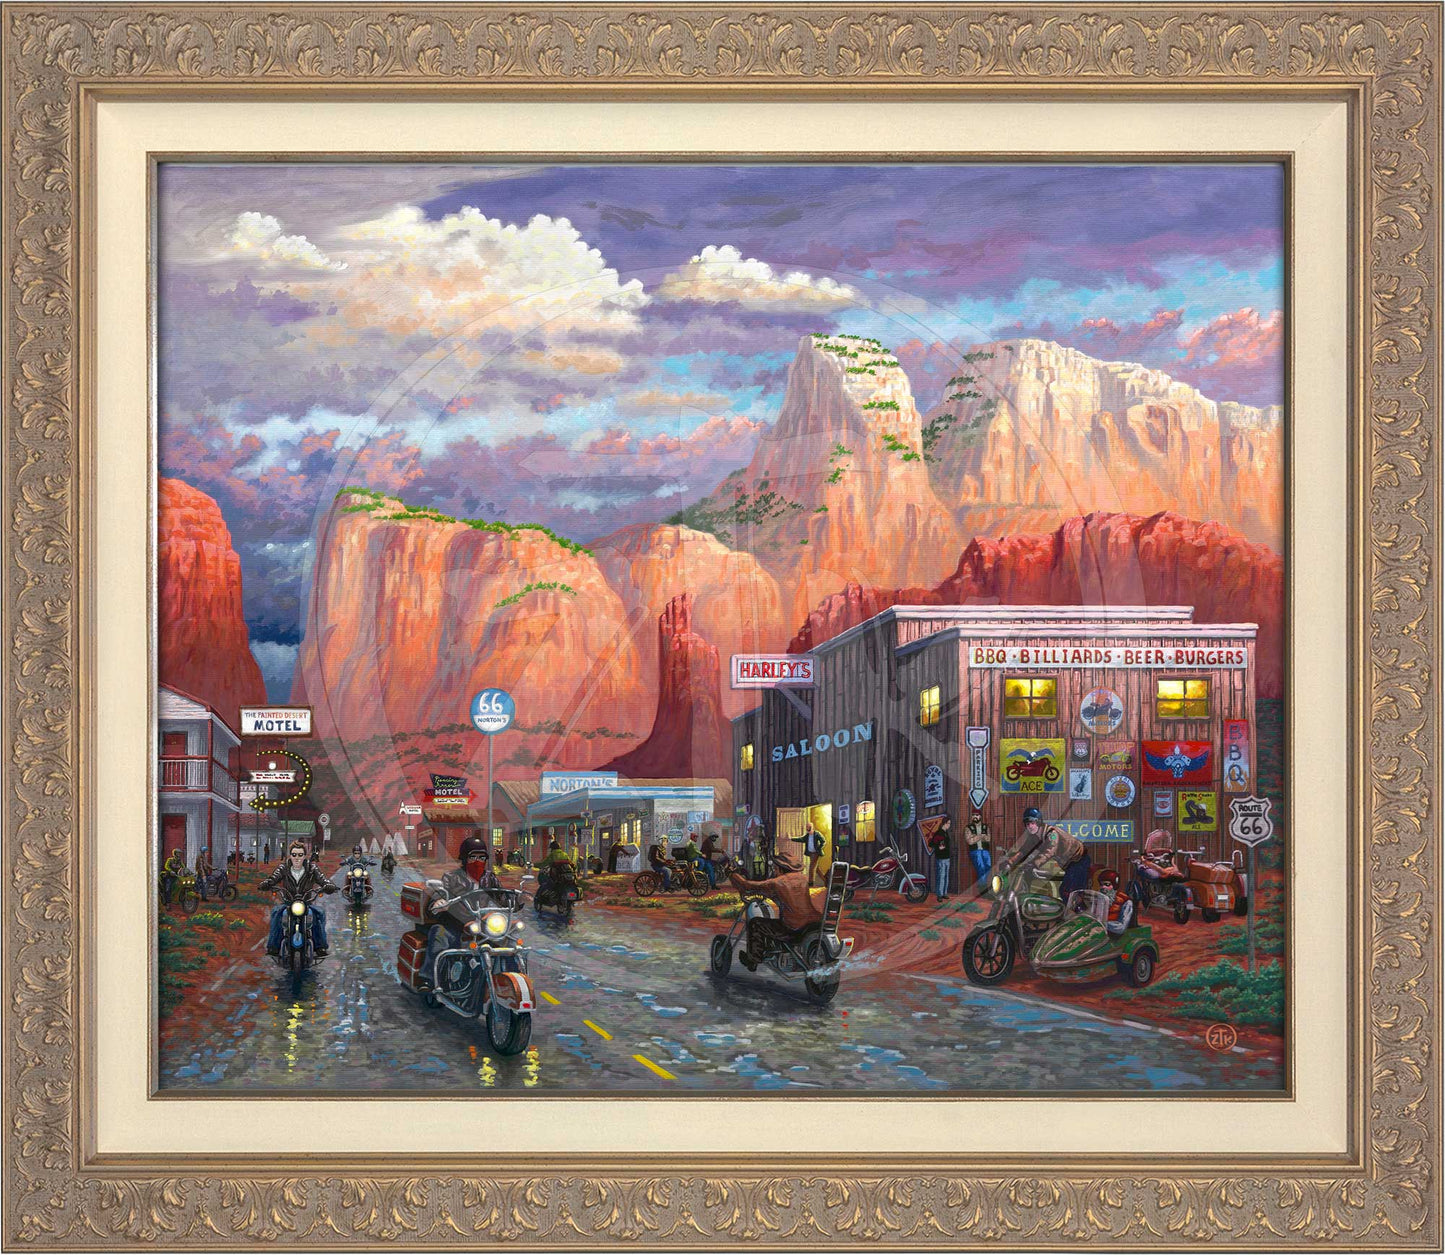 Get Your Kicks on Route 66 - Limited Edition Canvas